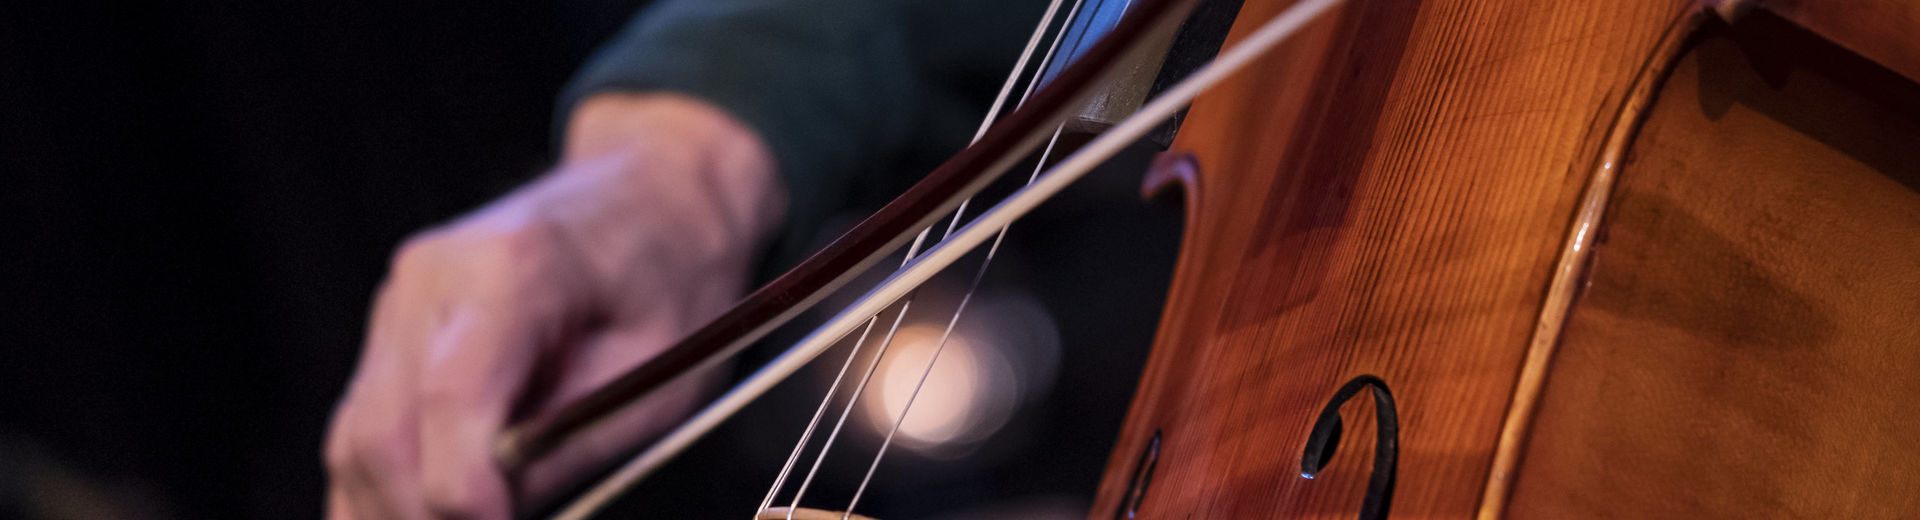 Close up image of a student playing the cello in a performance.